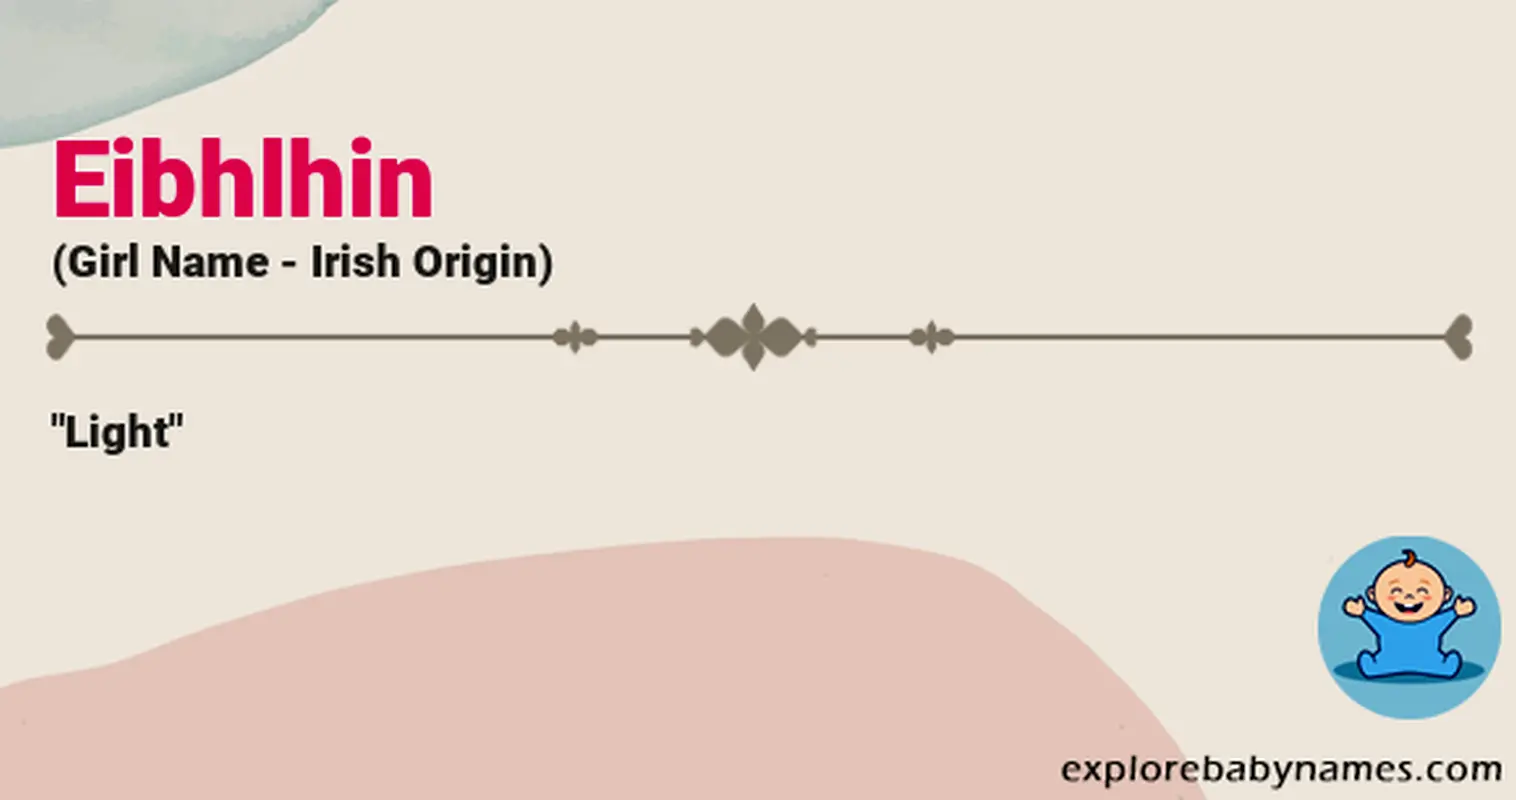 Meaning of Eibhlhin